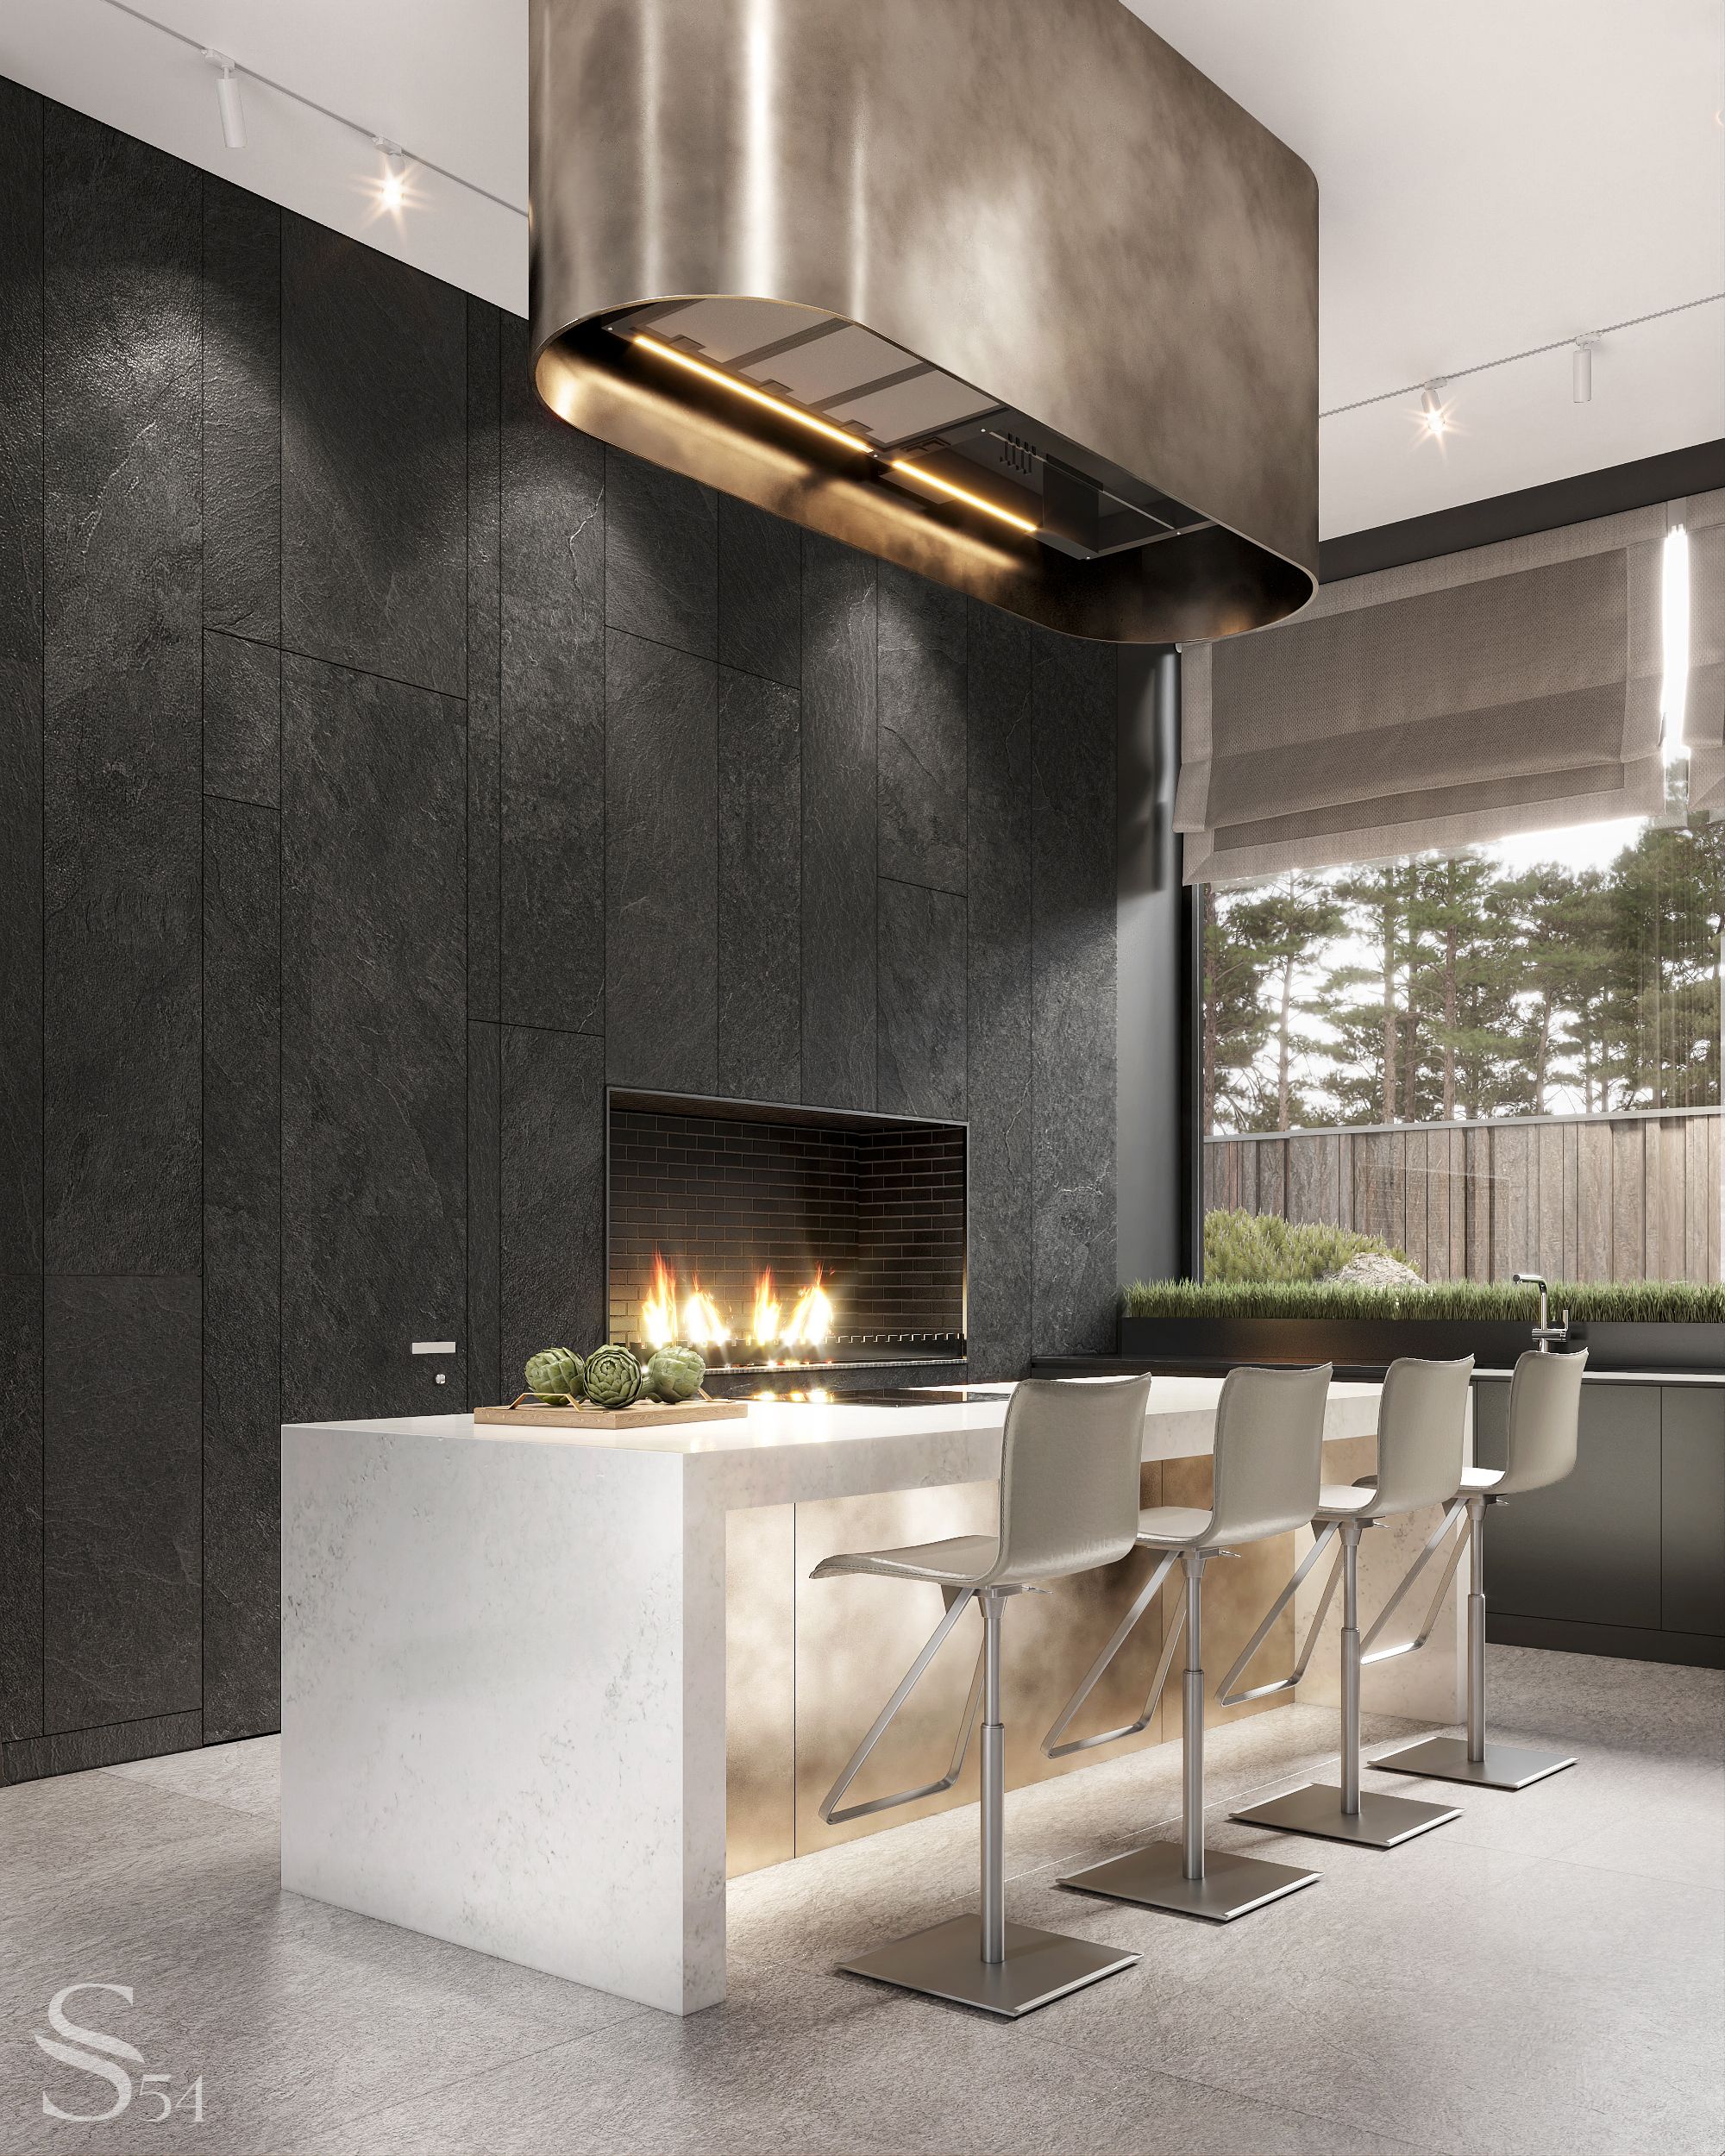 Expressive kitchen bar with enclosed storage and electric fireplace